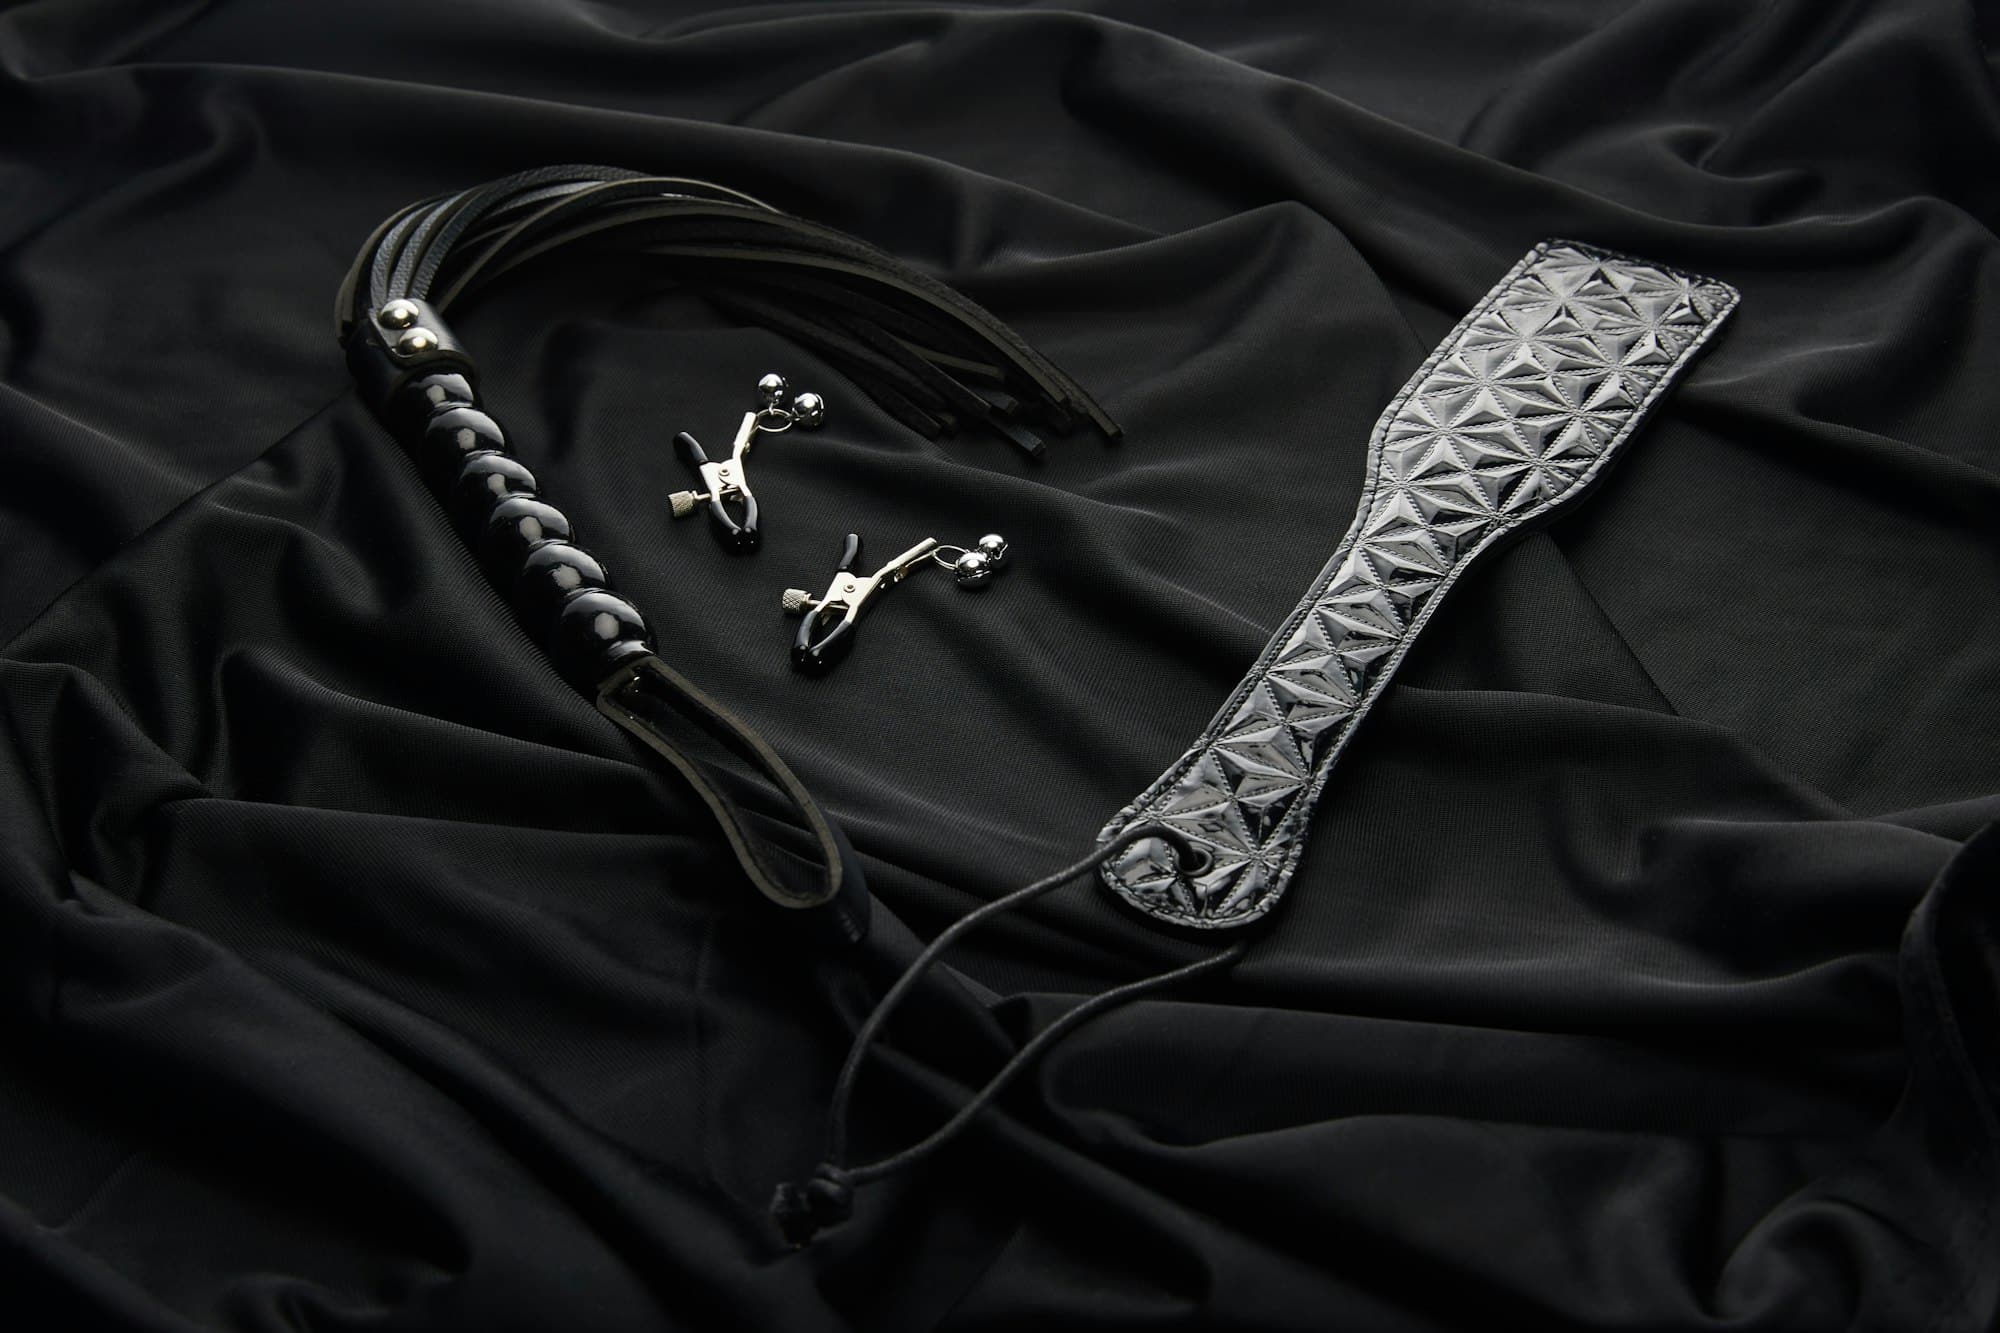 leather and metal sex toys on black textile background